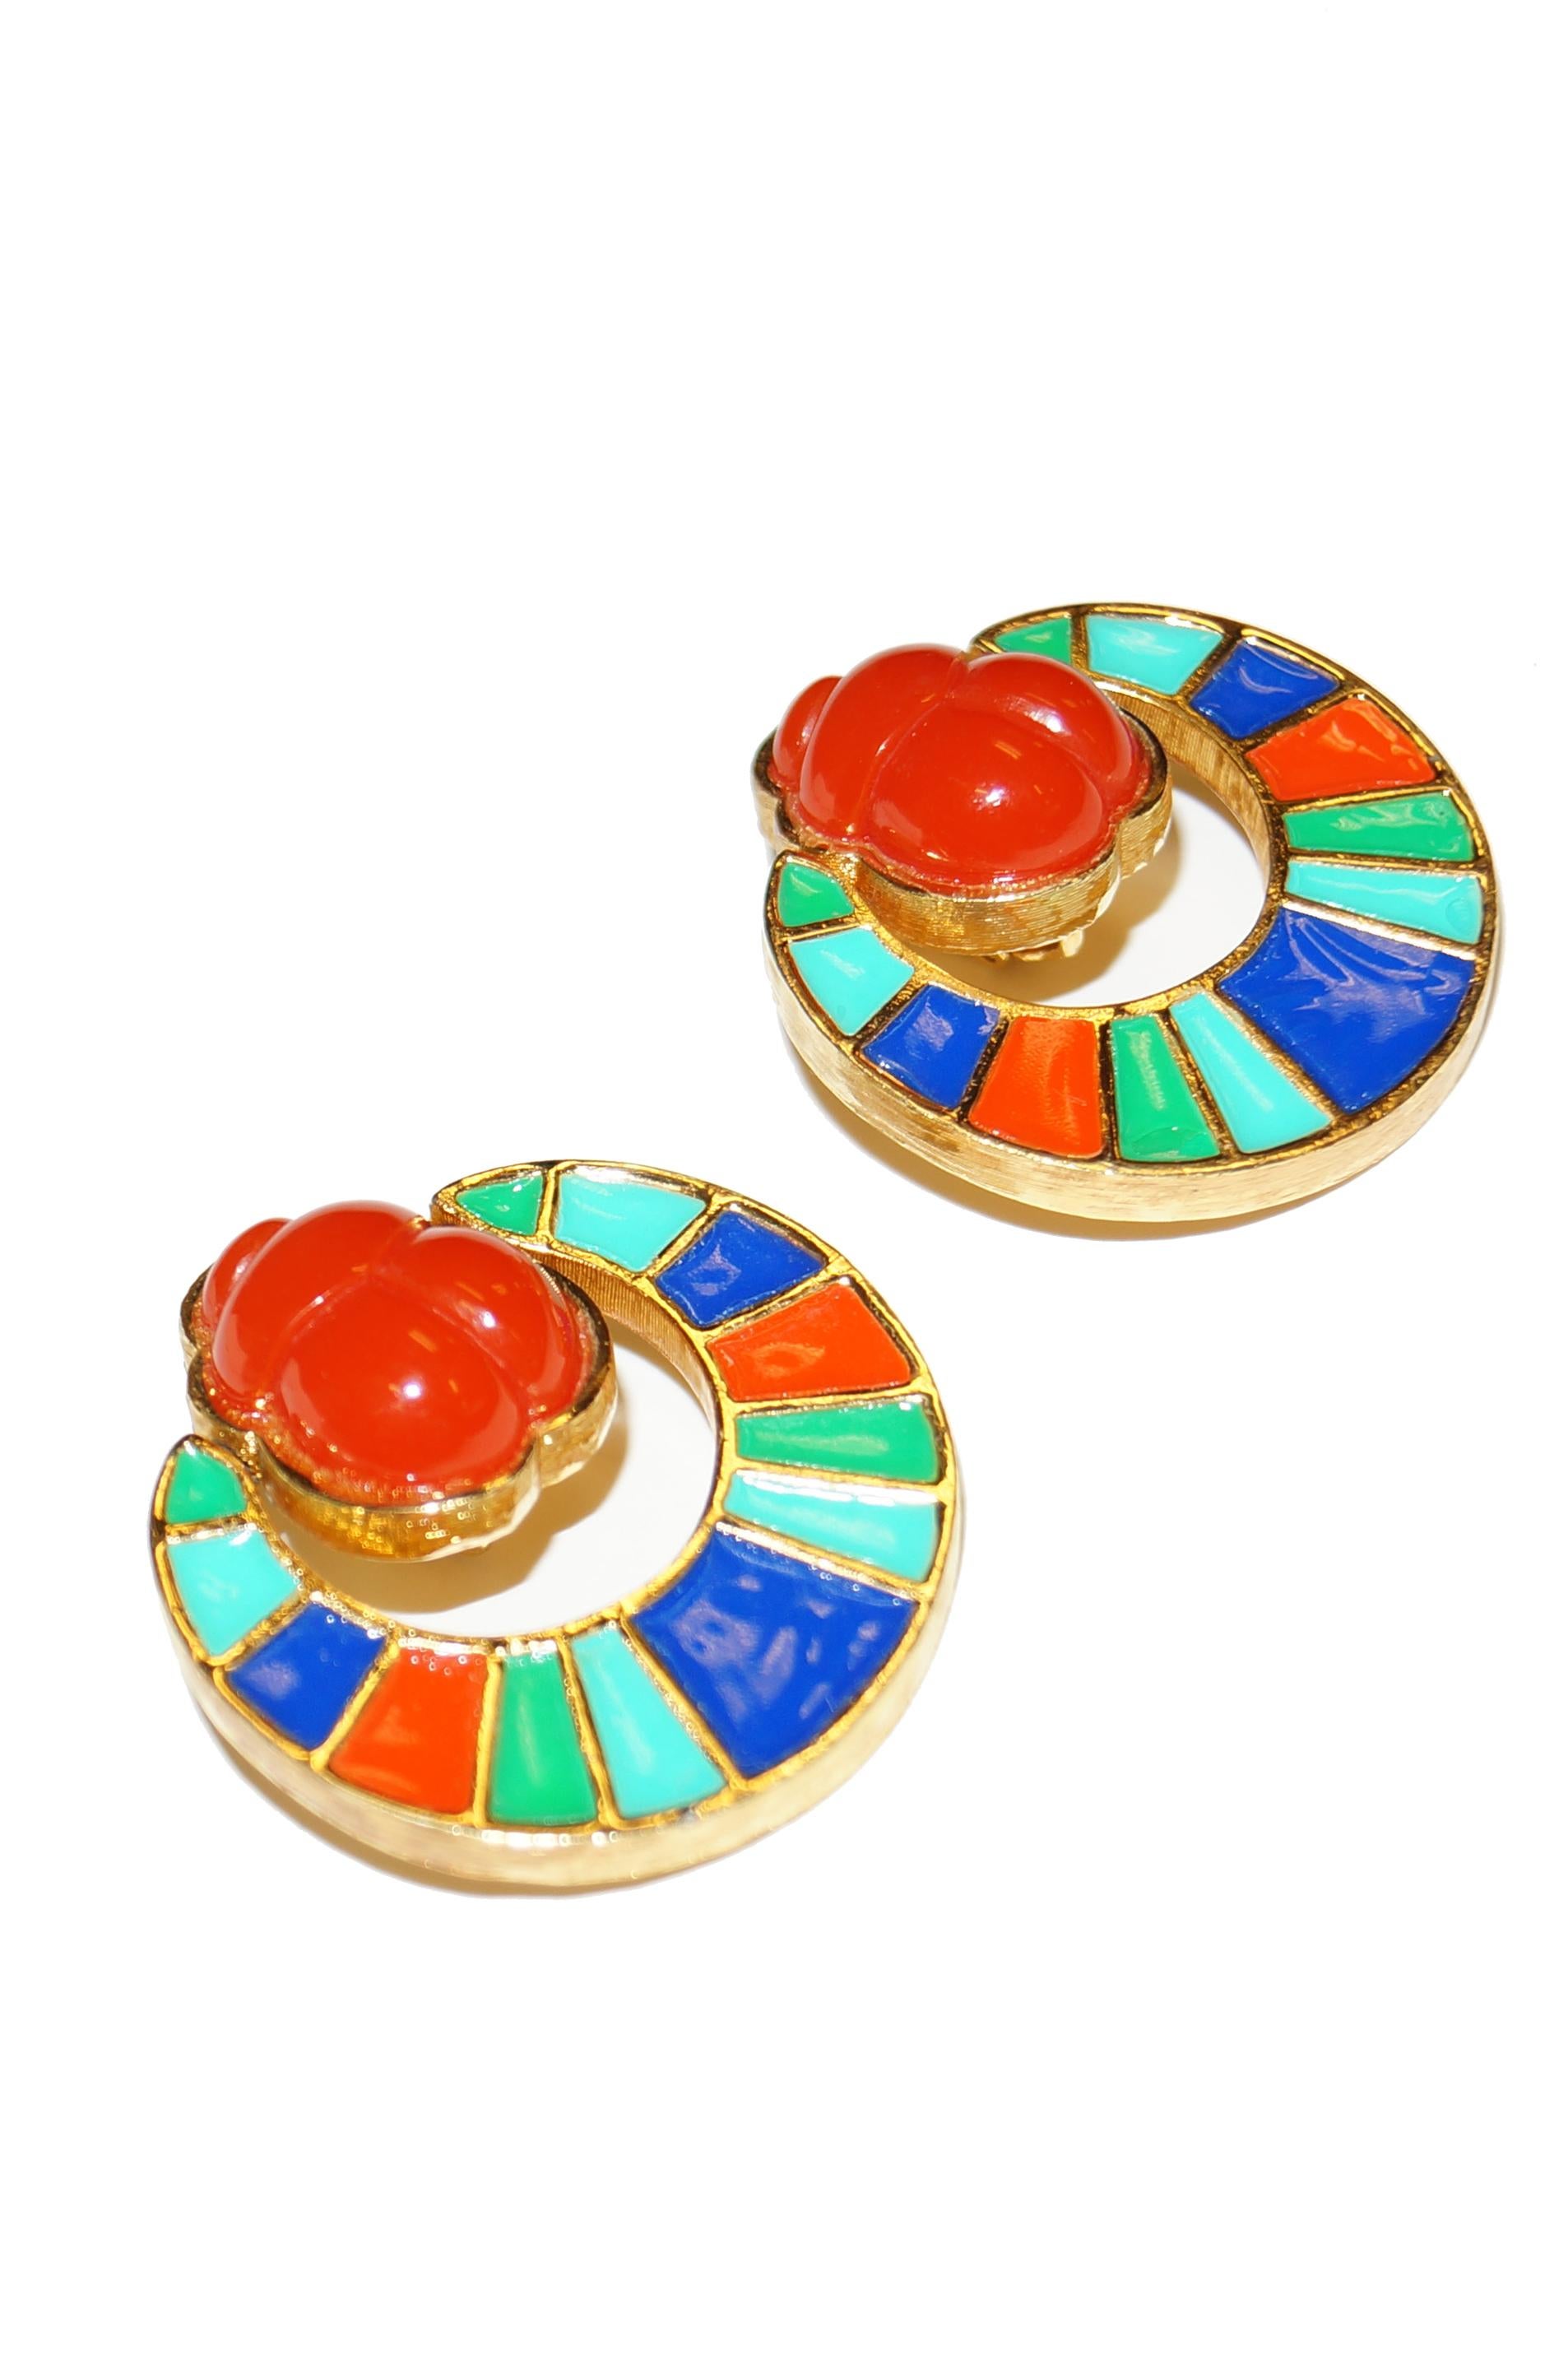 Astounding vivid blue, green, and orange enamel and acrylic earrings by Hattie Carnegie! This Egyptian Revival set of earrings feature a brilliant orange faux - carnelian scarab accented with a dangling moon - like enamel stripe semicircle. An